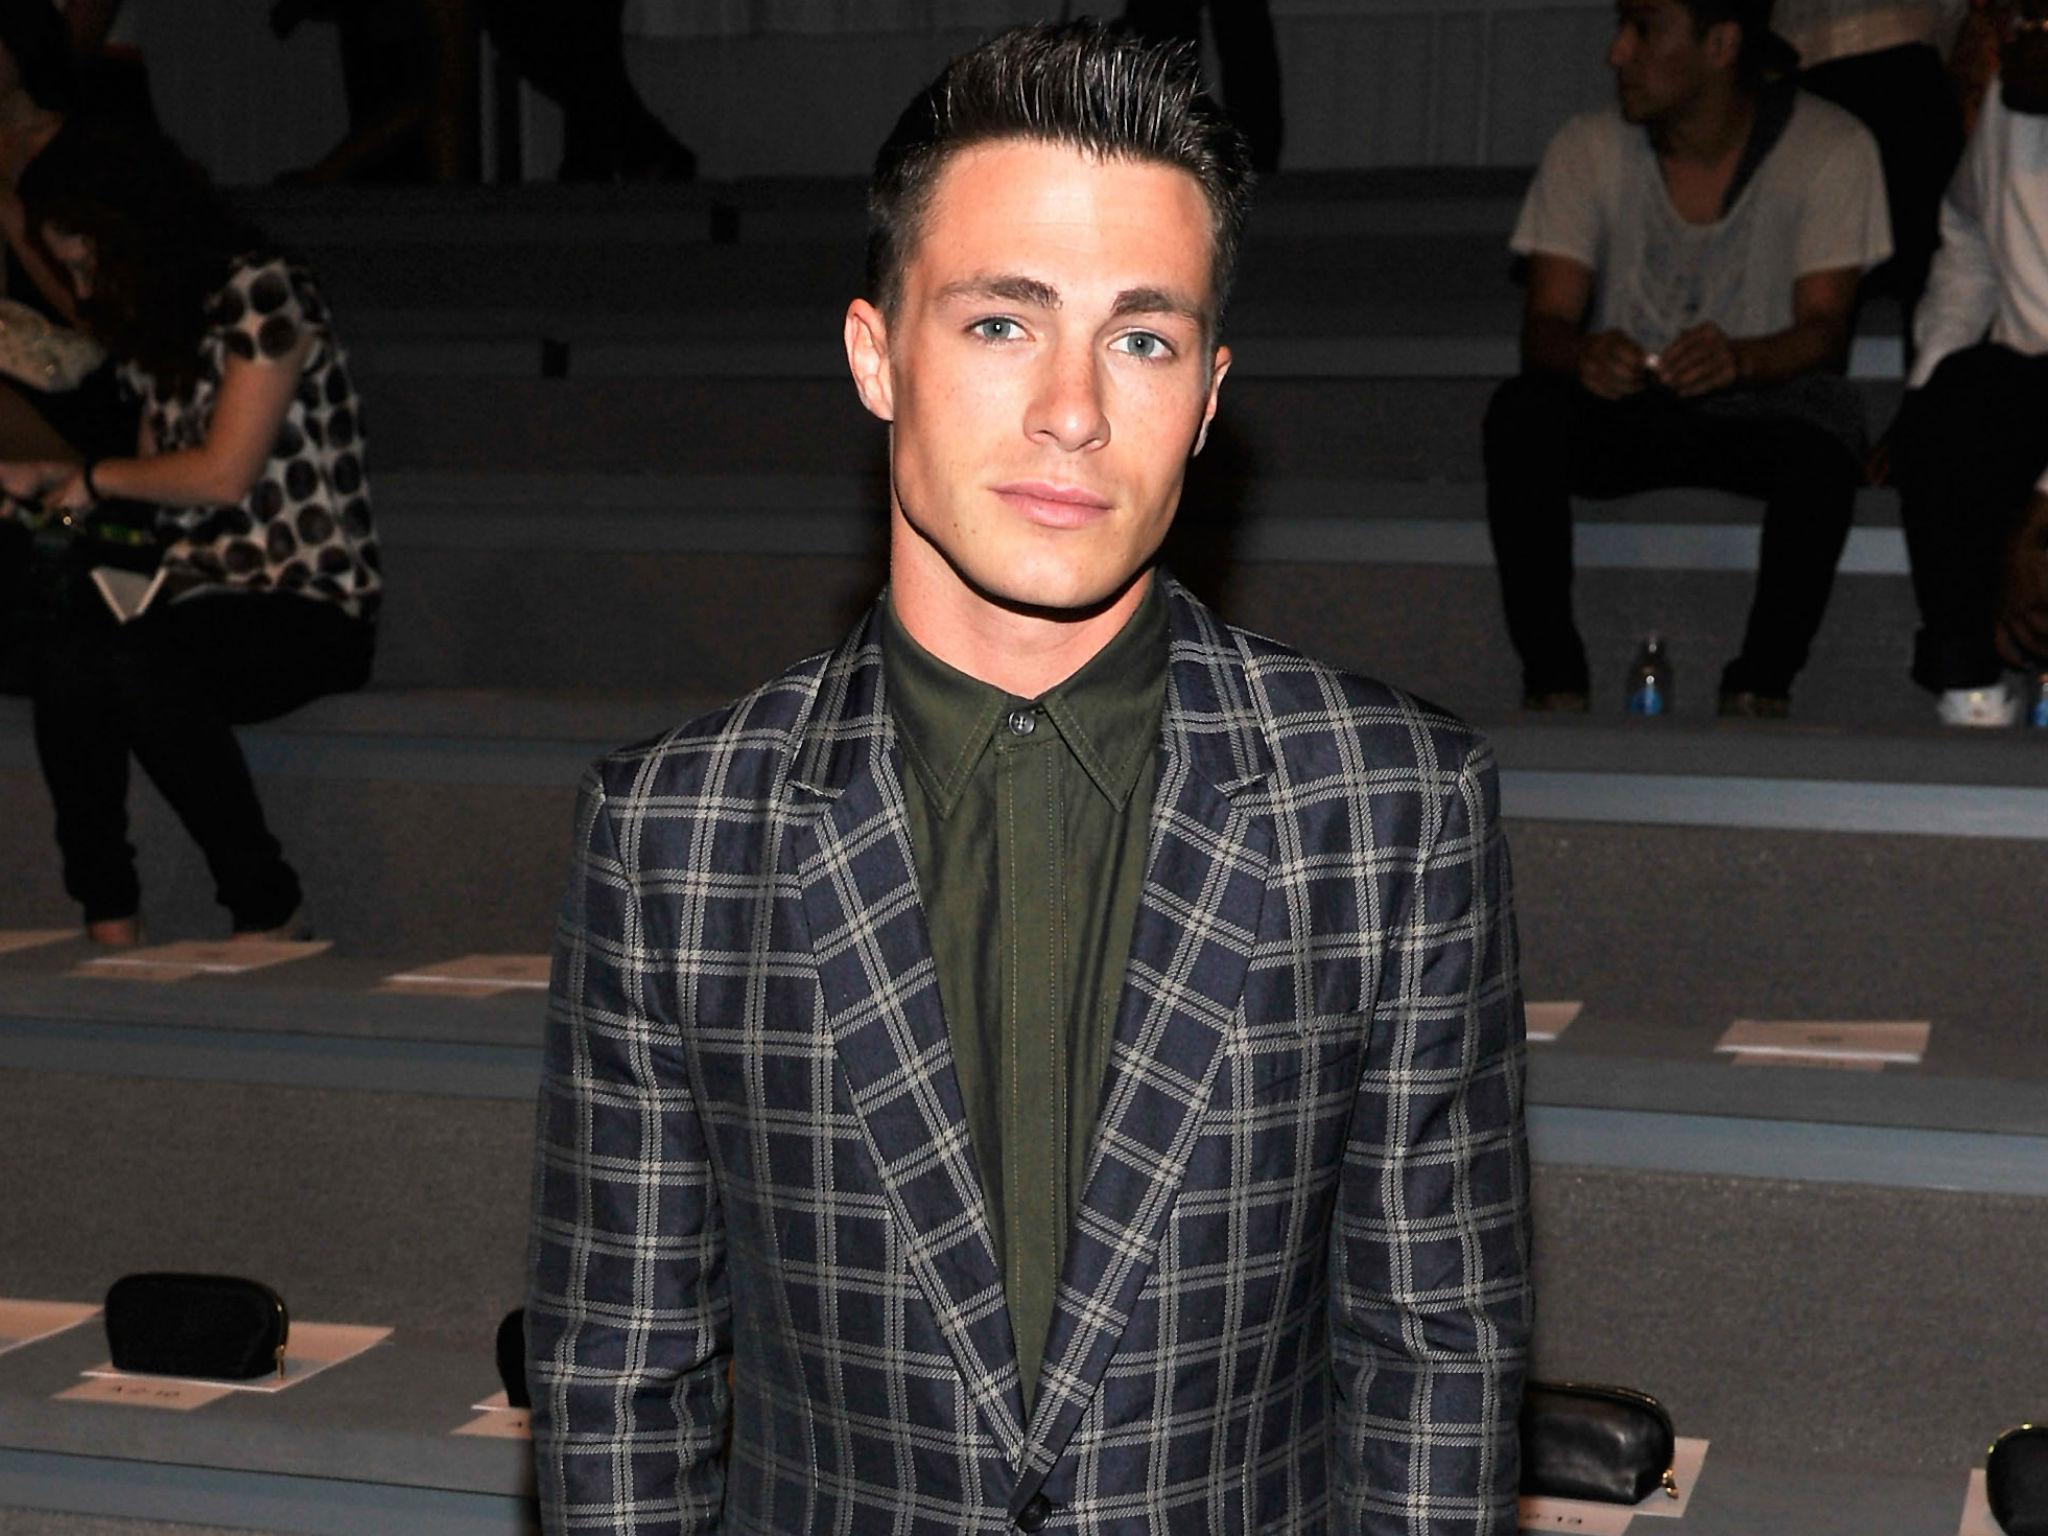 Colton Haynes came out at 14 to his classmates and friends